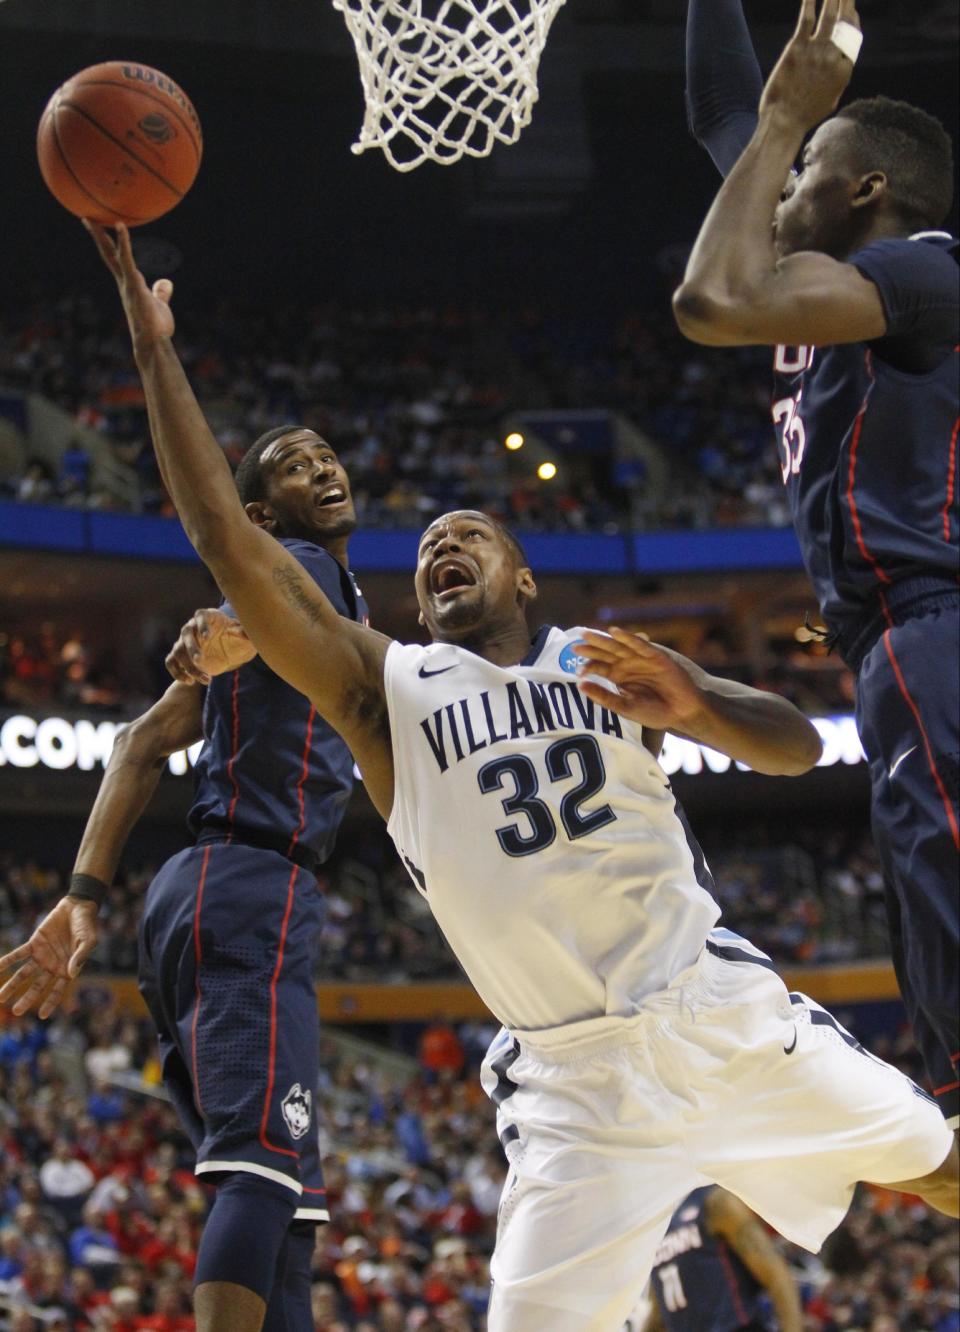 Villanova's James Bell (32) drives past Connecticut's Amida Brimah (35) during the first half of a third-round game in the NCAA men's college basketball tournament in Buffalo, N.Y., Saturday, March 22, 2014. (AP Photo/Bill Wippert)